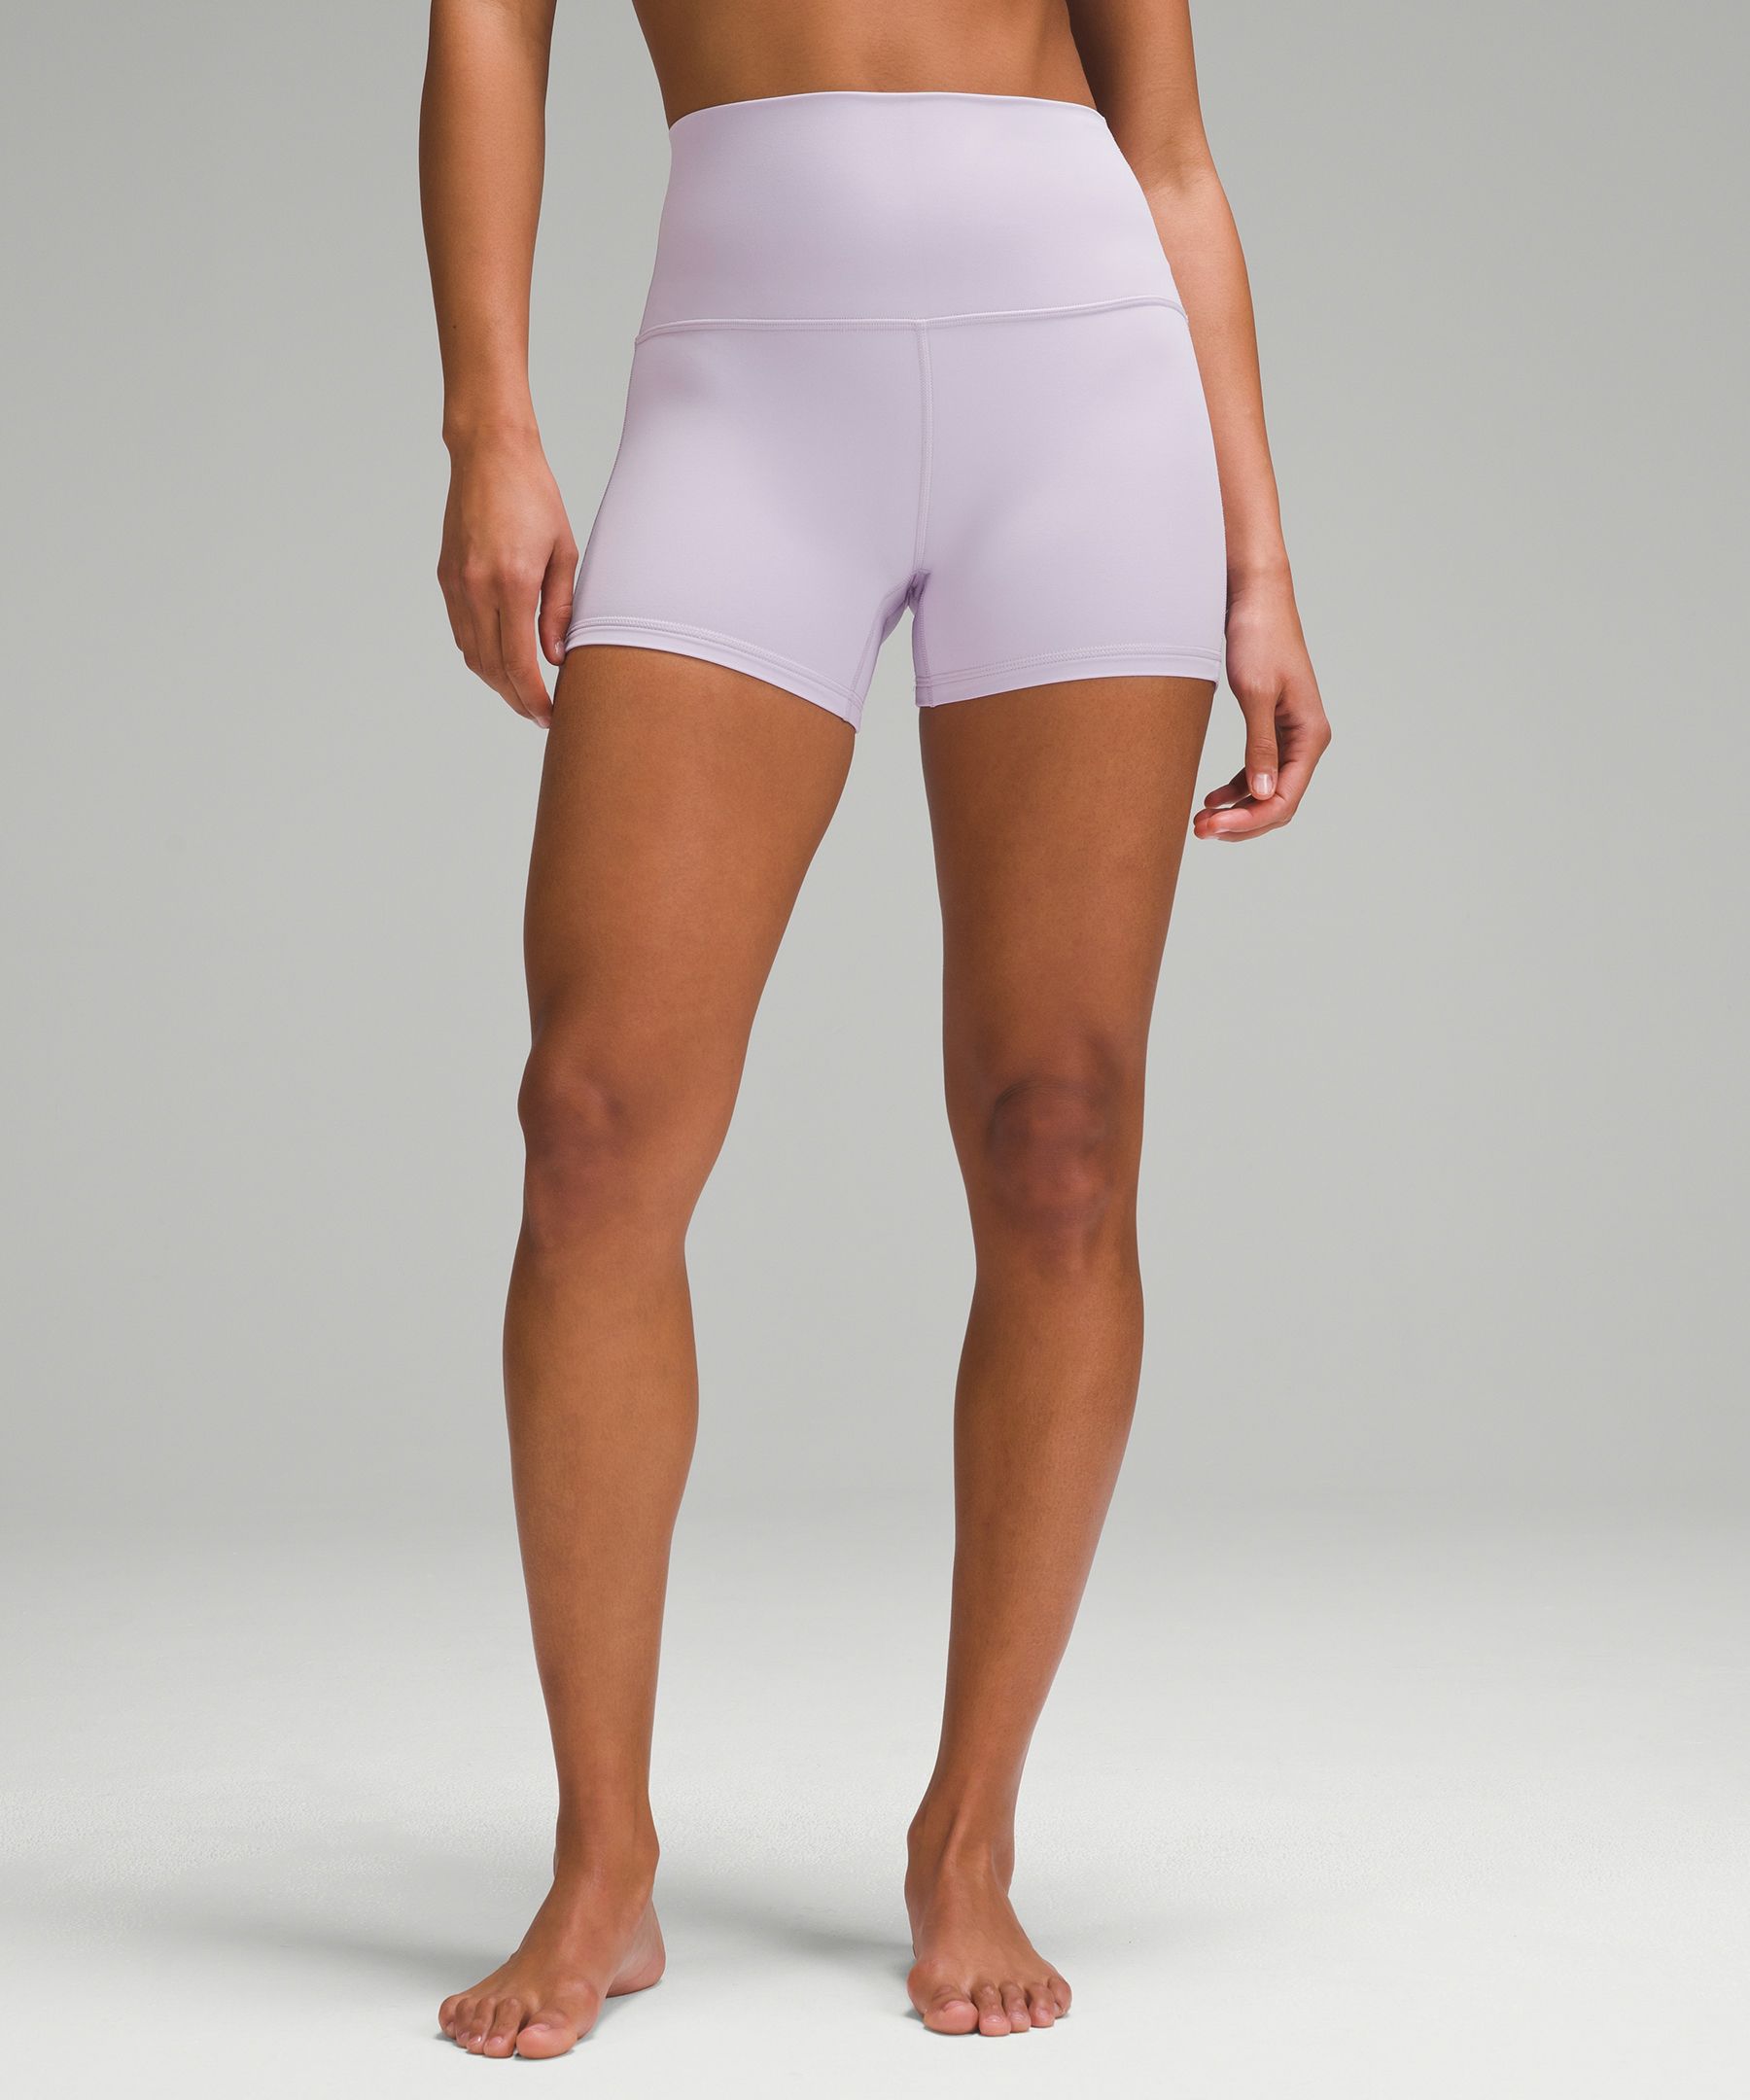 Lululemon Fast and Free Short 8” Black Size 6 - $45 (33% Off Retail) - From  Nicole